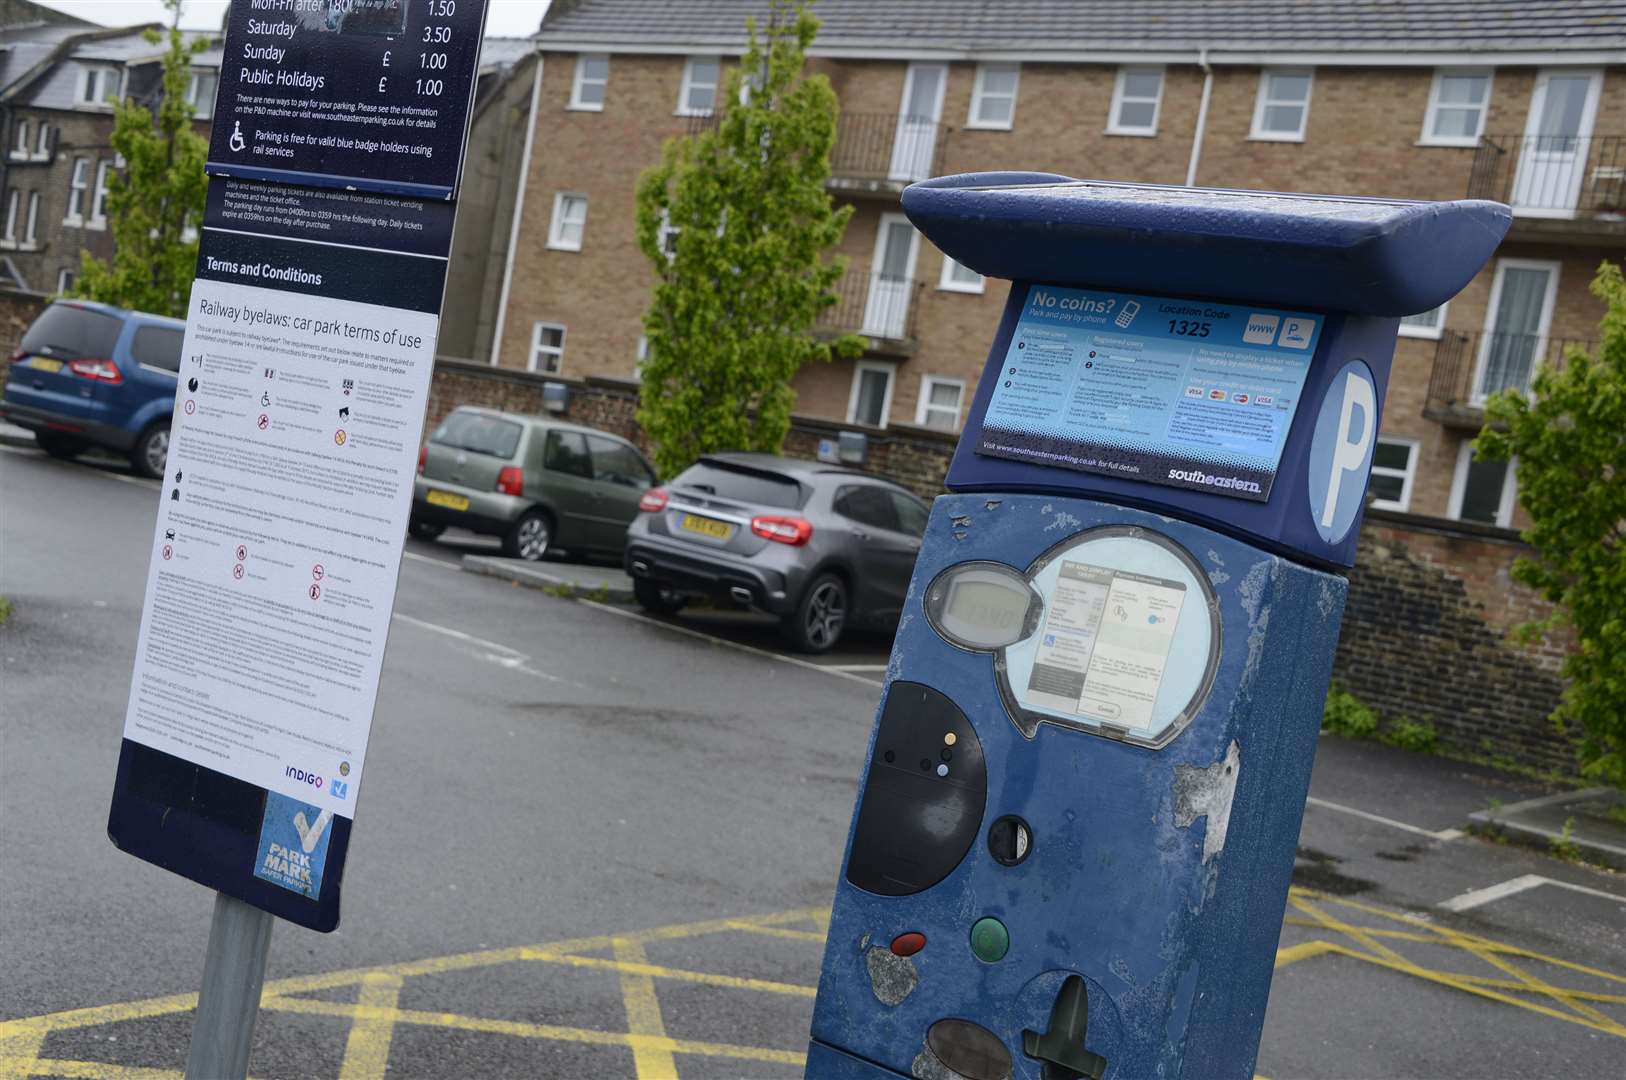 A new parking strategy for Dover has been released